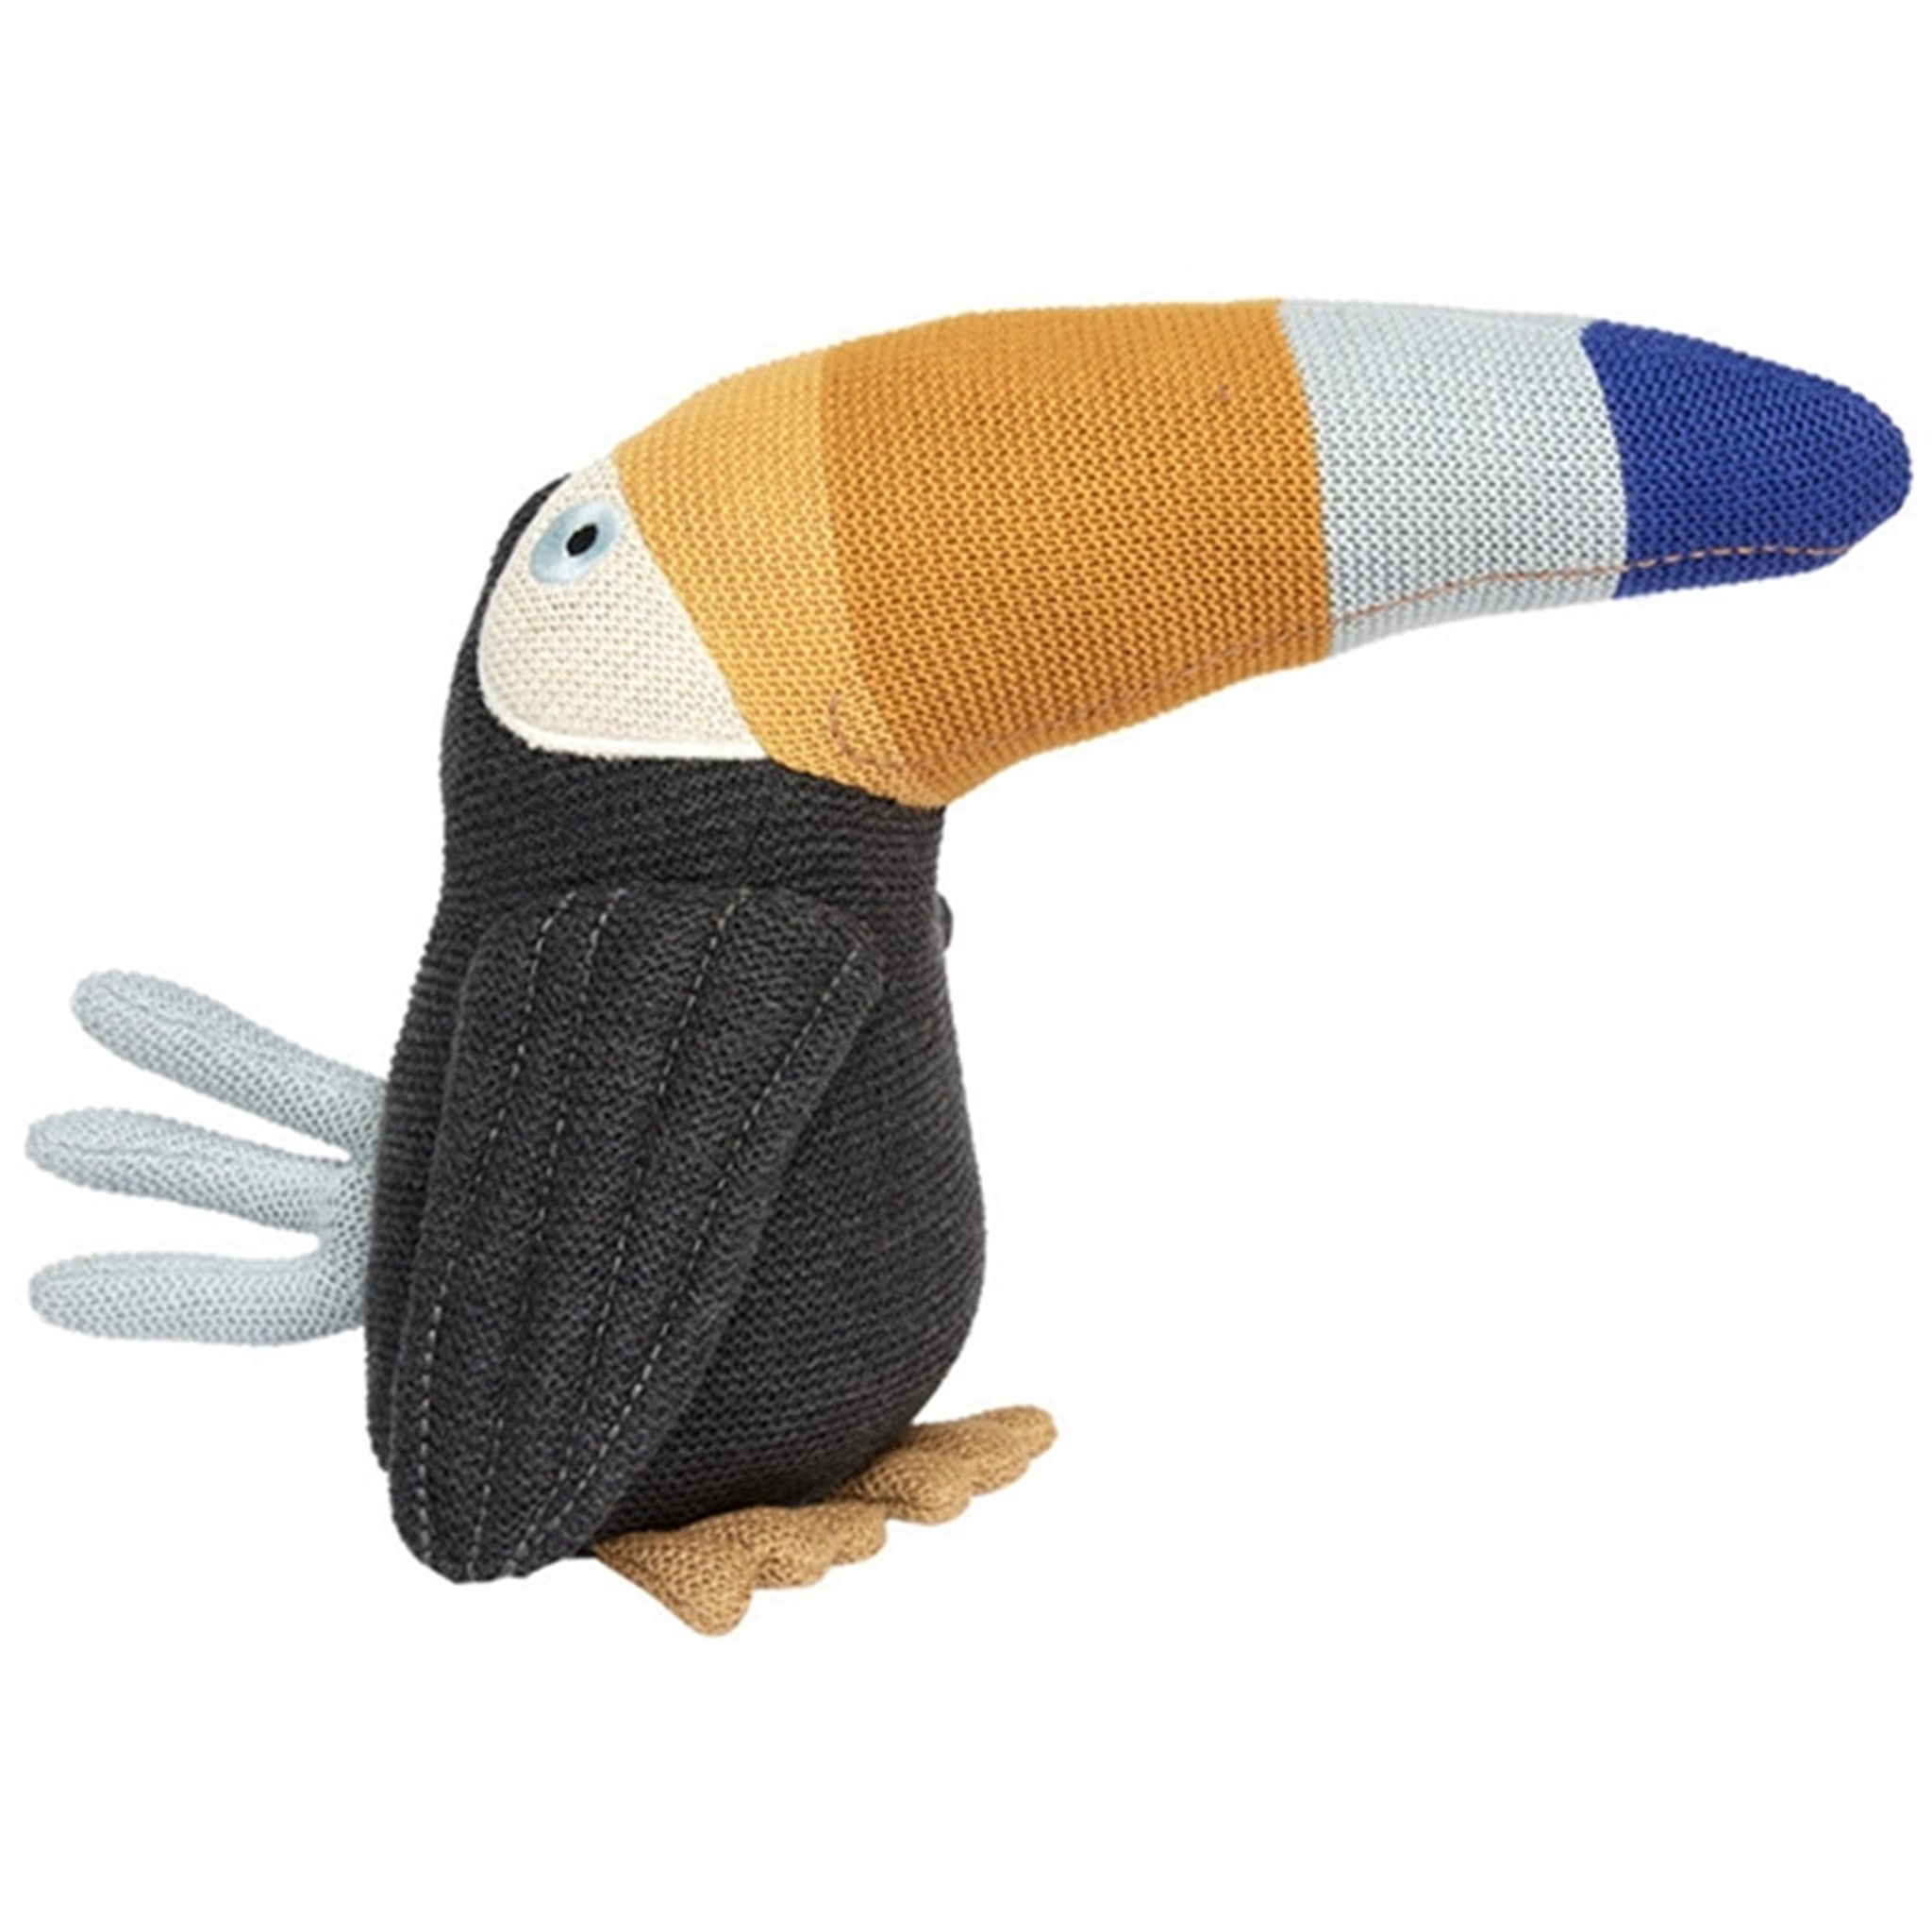 OYOY Toby Toucan Anthracite / Blue